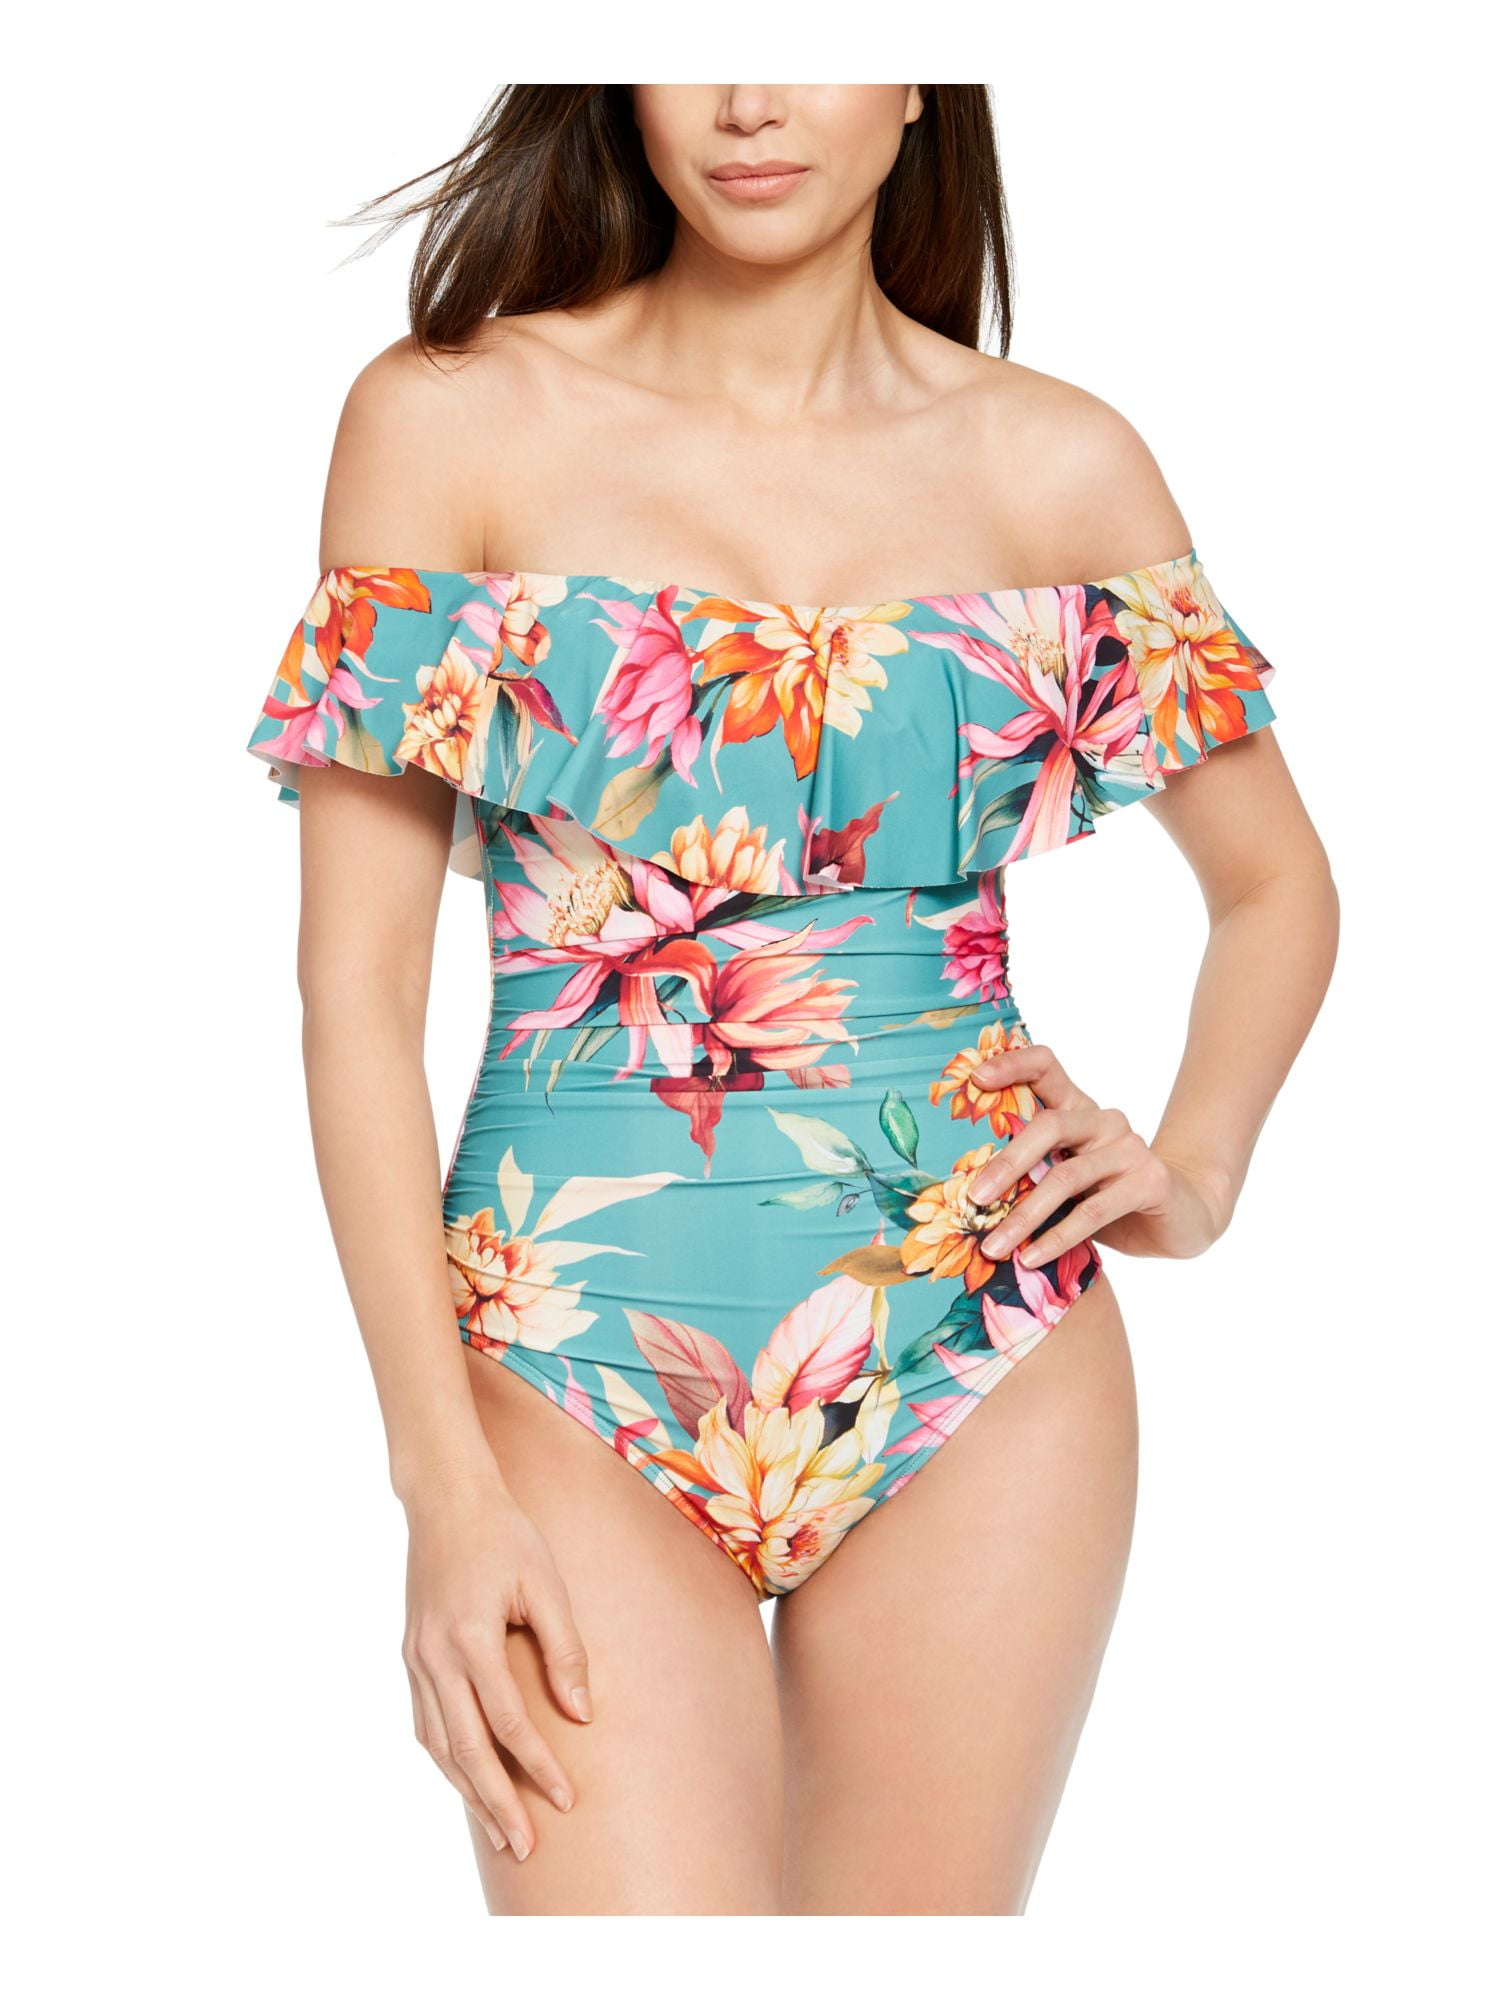 Coco Contours by Coco Reef One-Shoulder Solid Sarong One-Piece